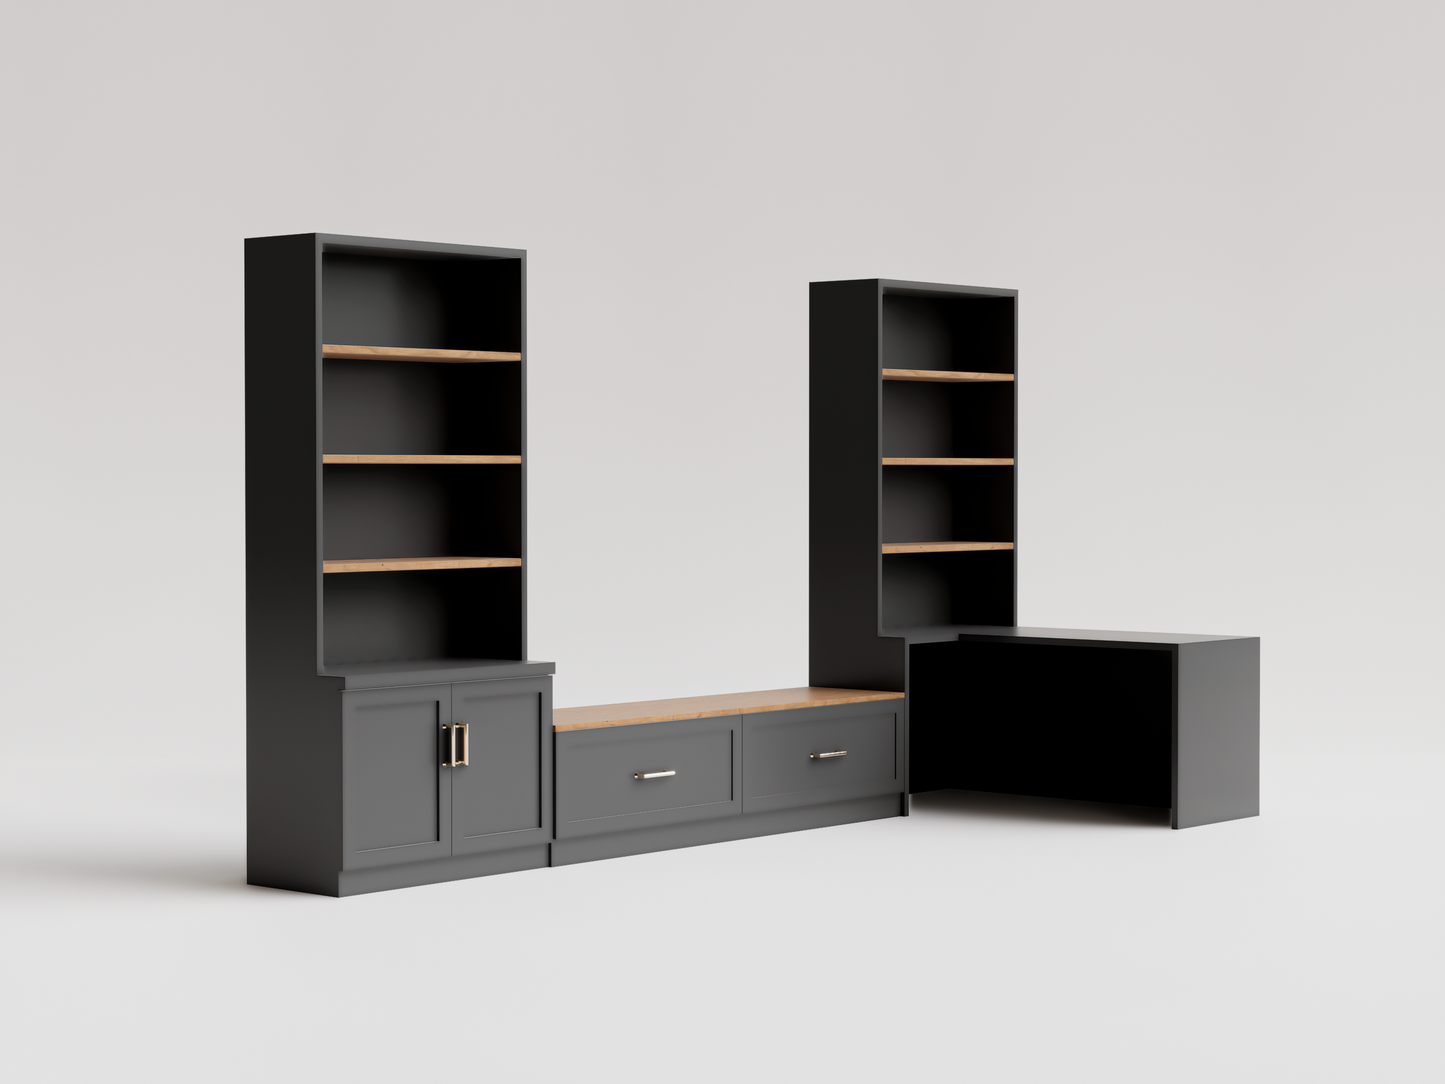 Modular Office and Bookshelf Furniture with Integrated Seat and Desk - Modern and Functional Design